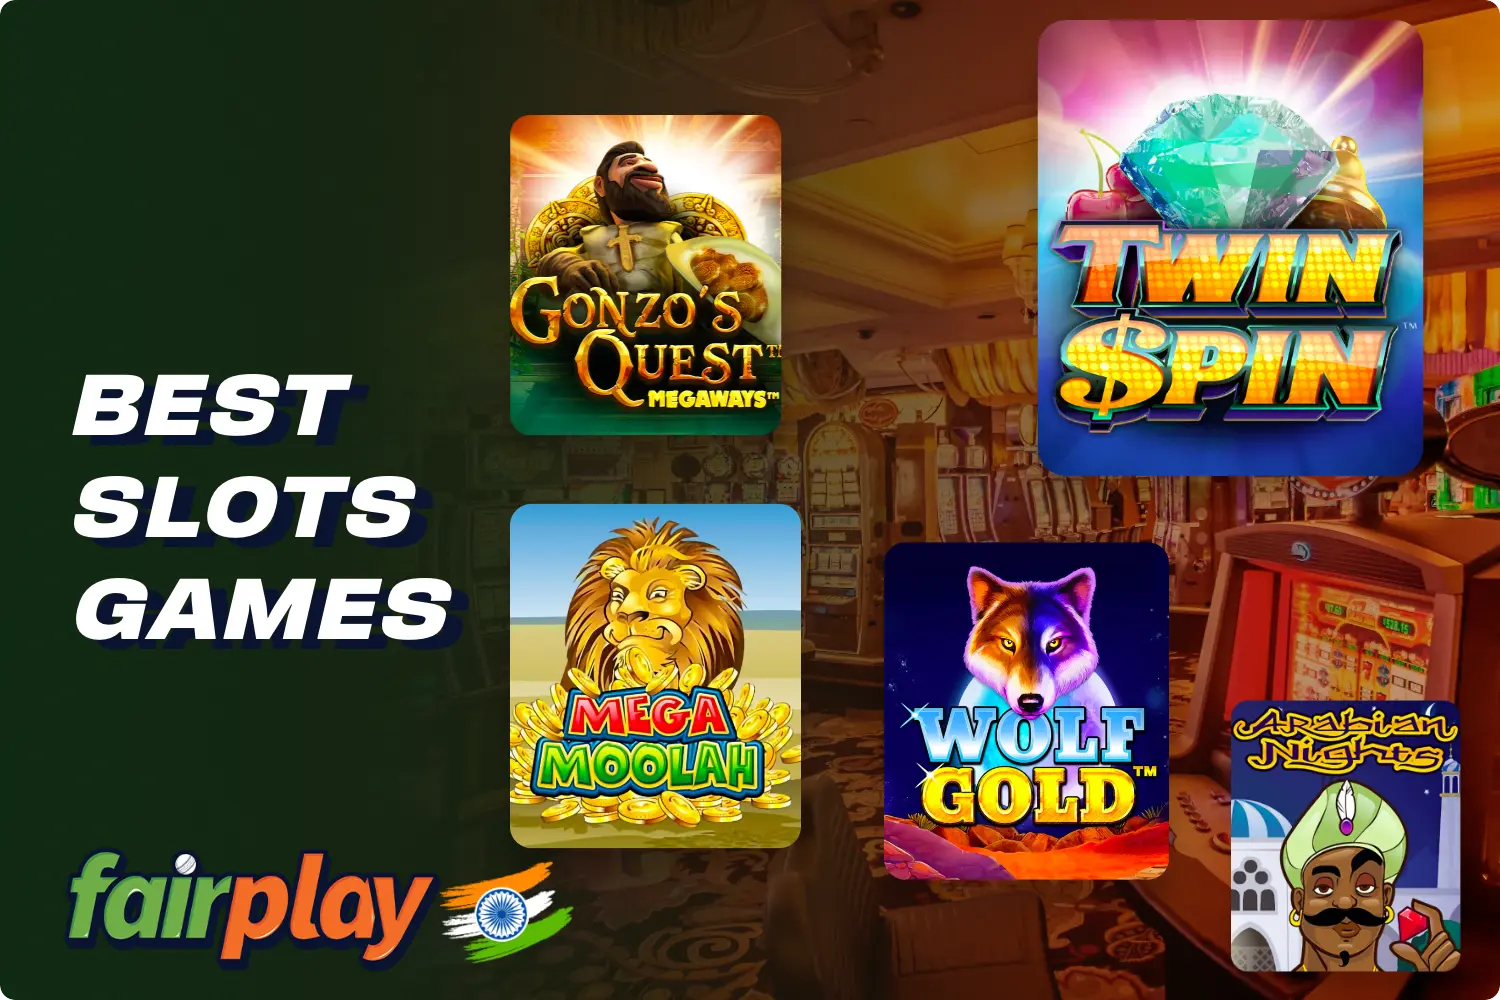 In the special section of Fairplay casino you will find a lot of interesting and exciting slots